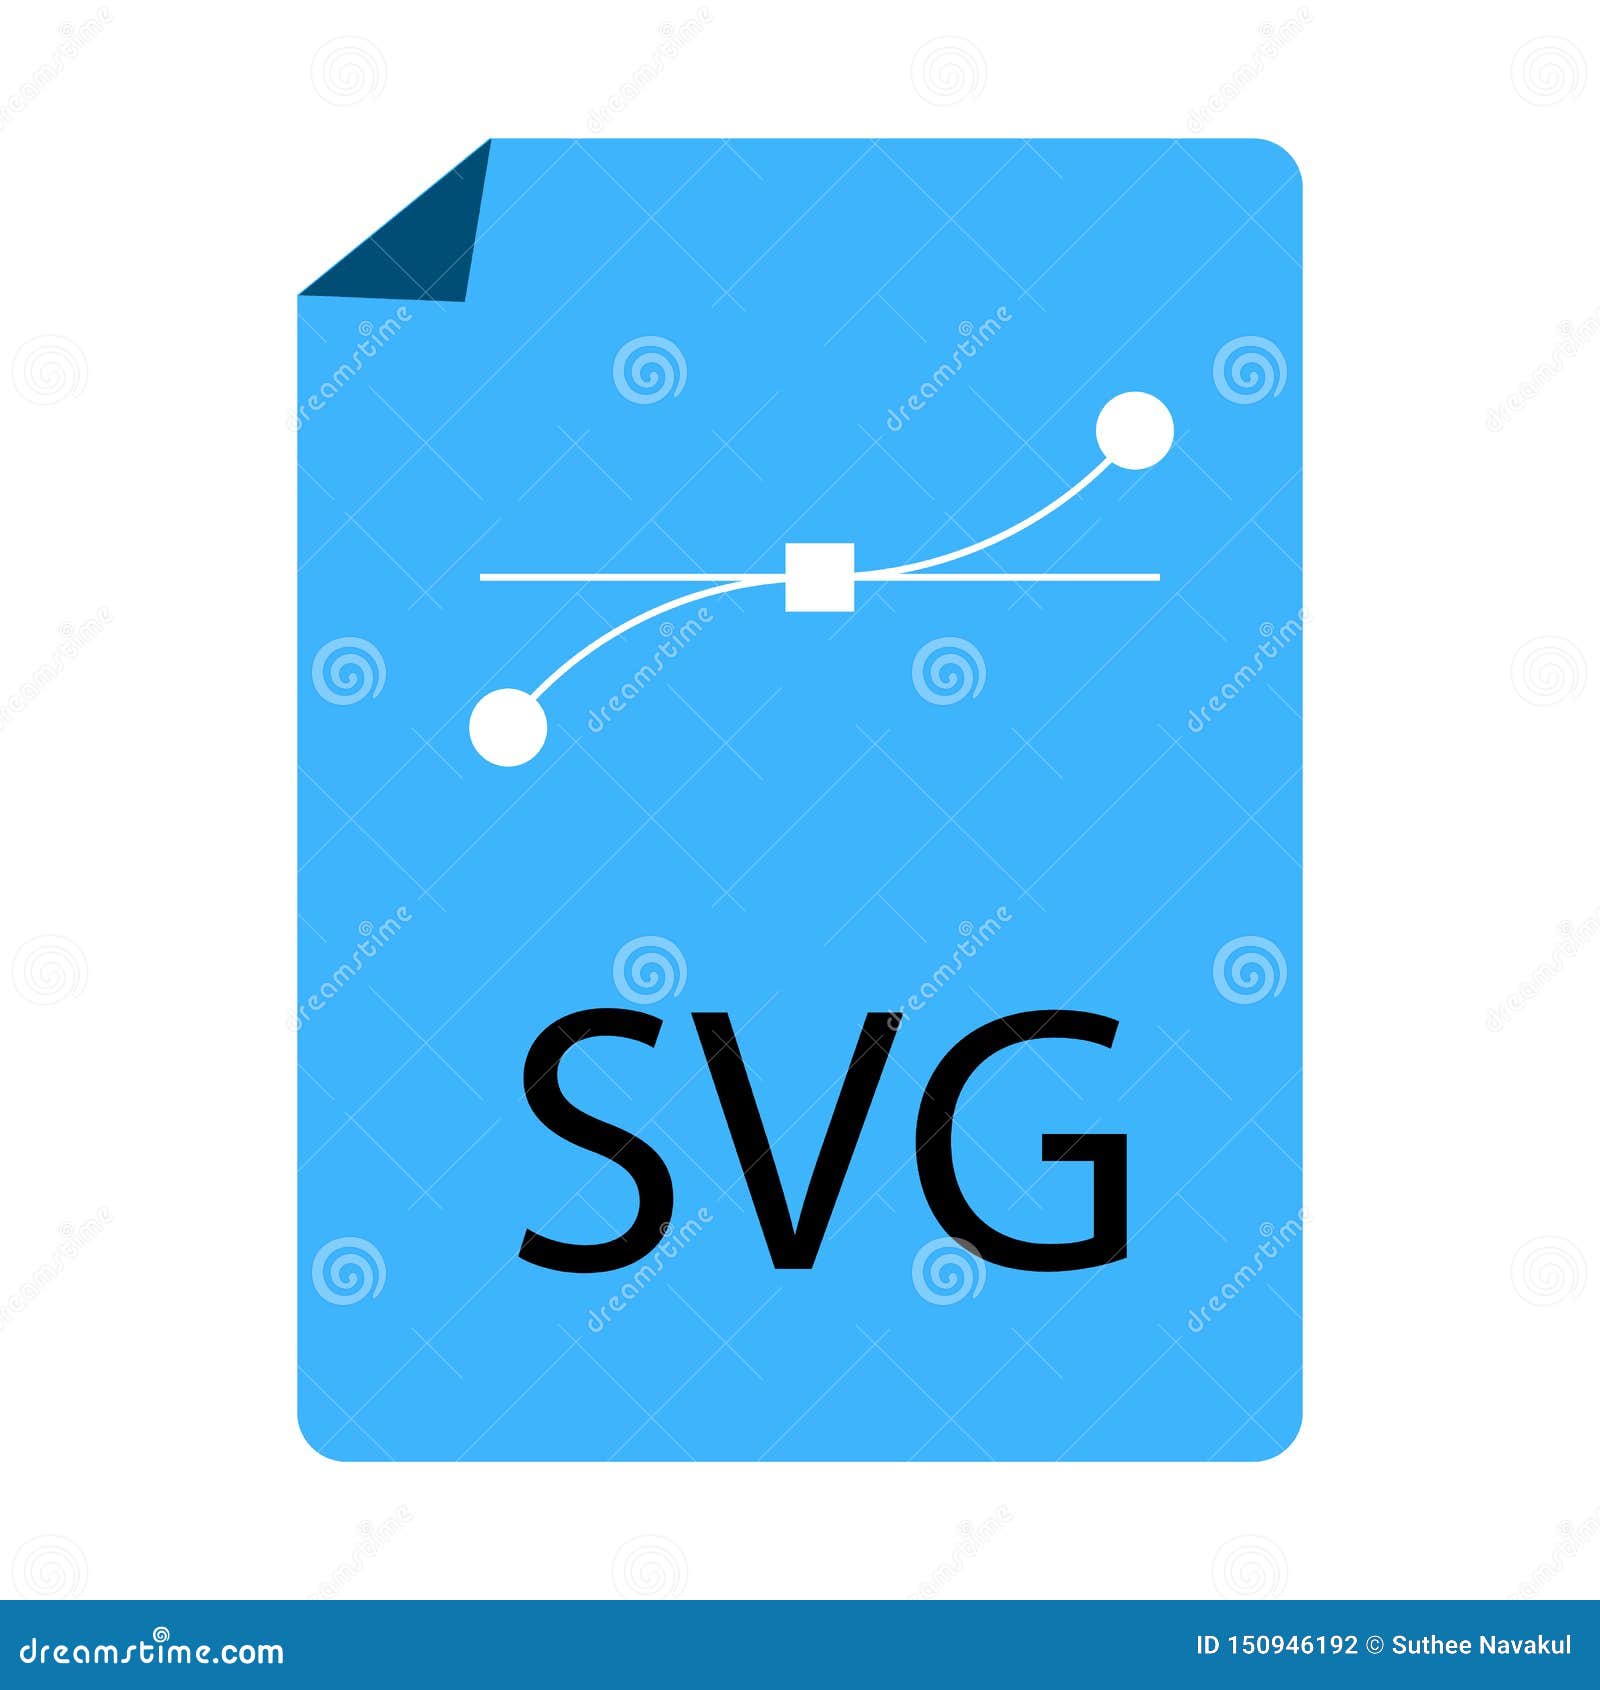 Download Blue Svg File Document Icon On White Background Flat Style Blue Svg File Icon For Your Web Site Design Logo App Ui Download Stock Vector Illustration Of File Longhaired 150946192